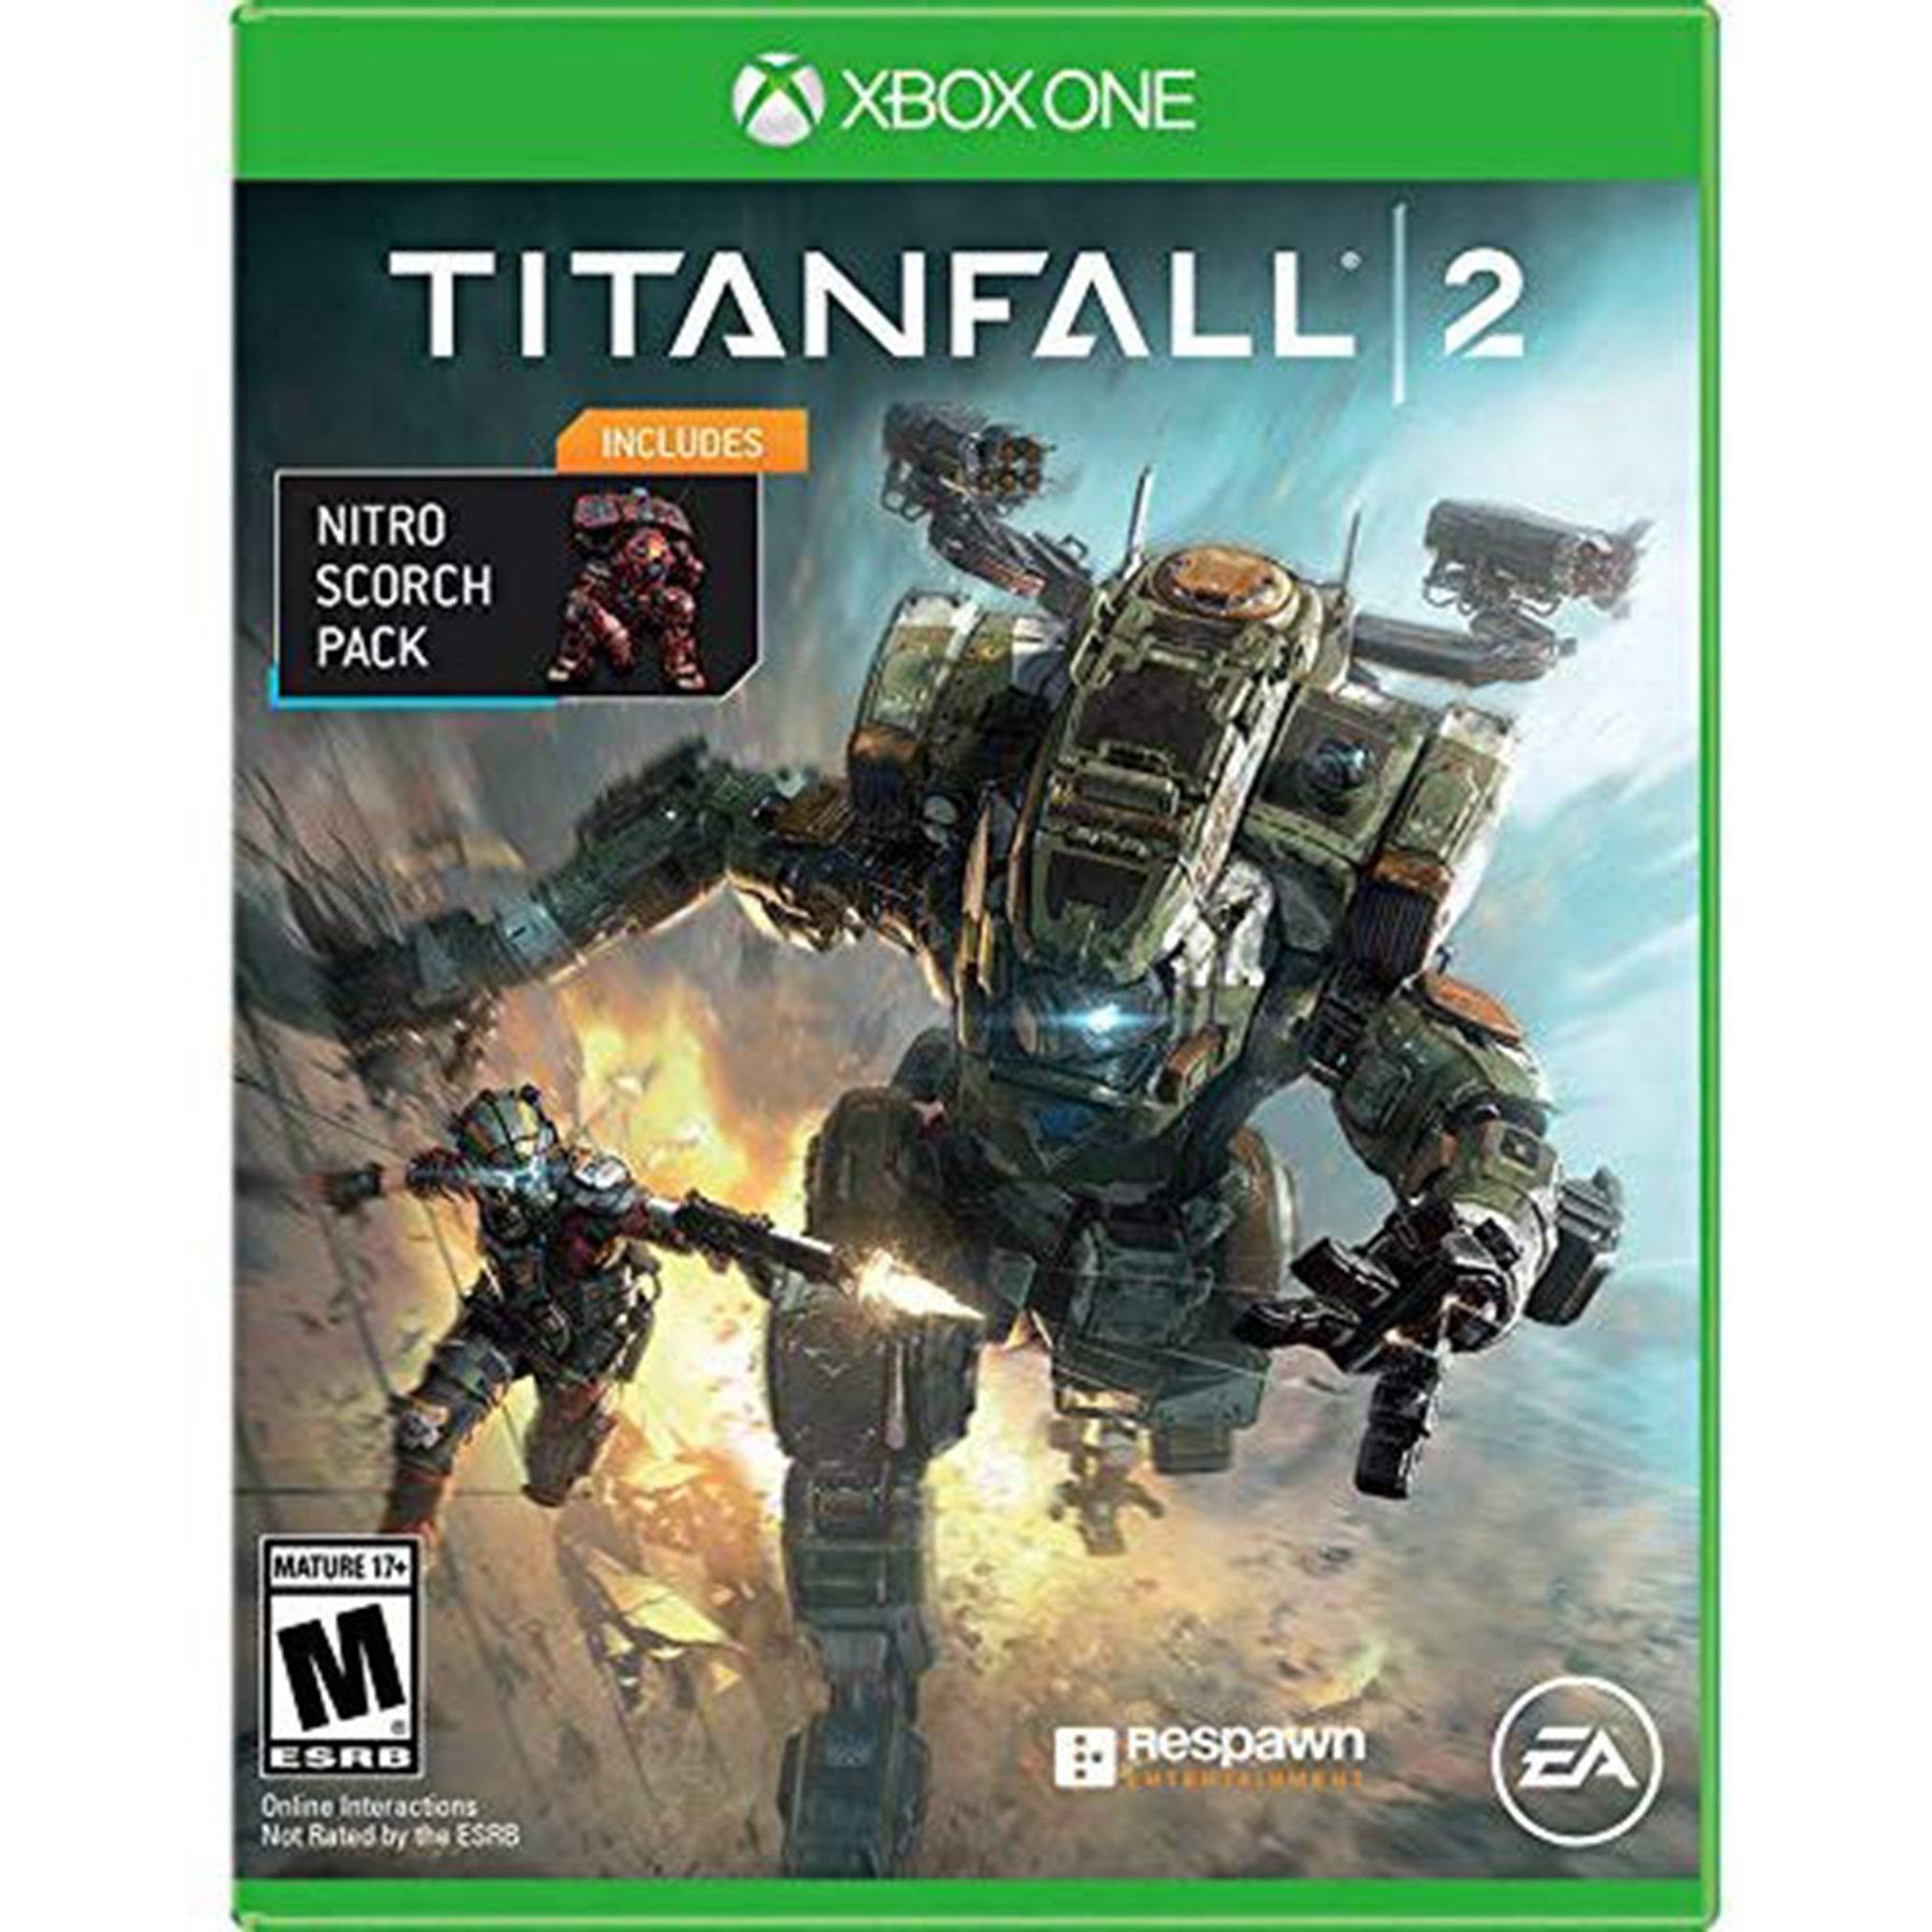 XBOX One Titanfall 2 & Sunset Overdrive Games w/ Xbox LIVE 12 Month Gold  Bundle